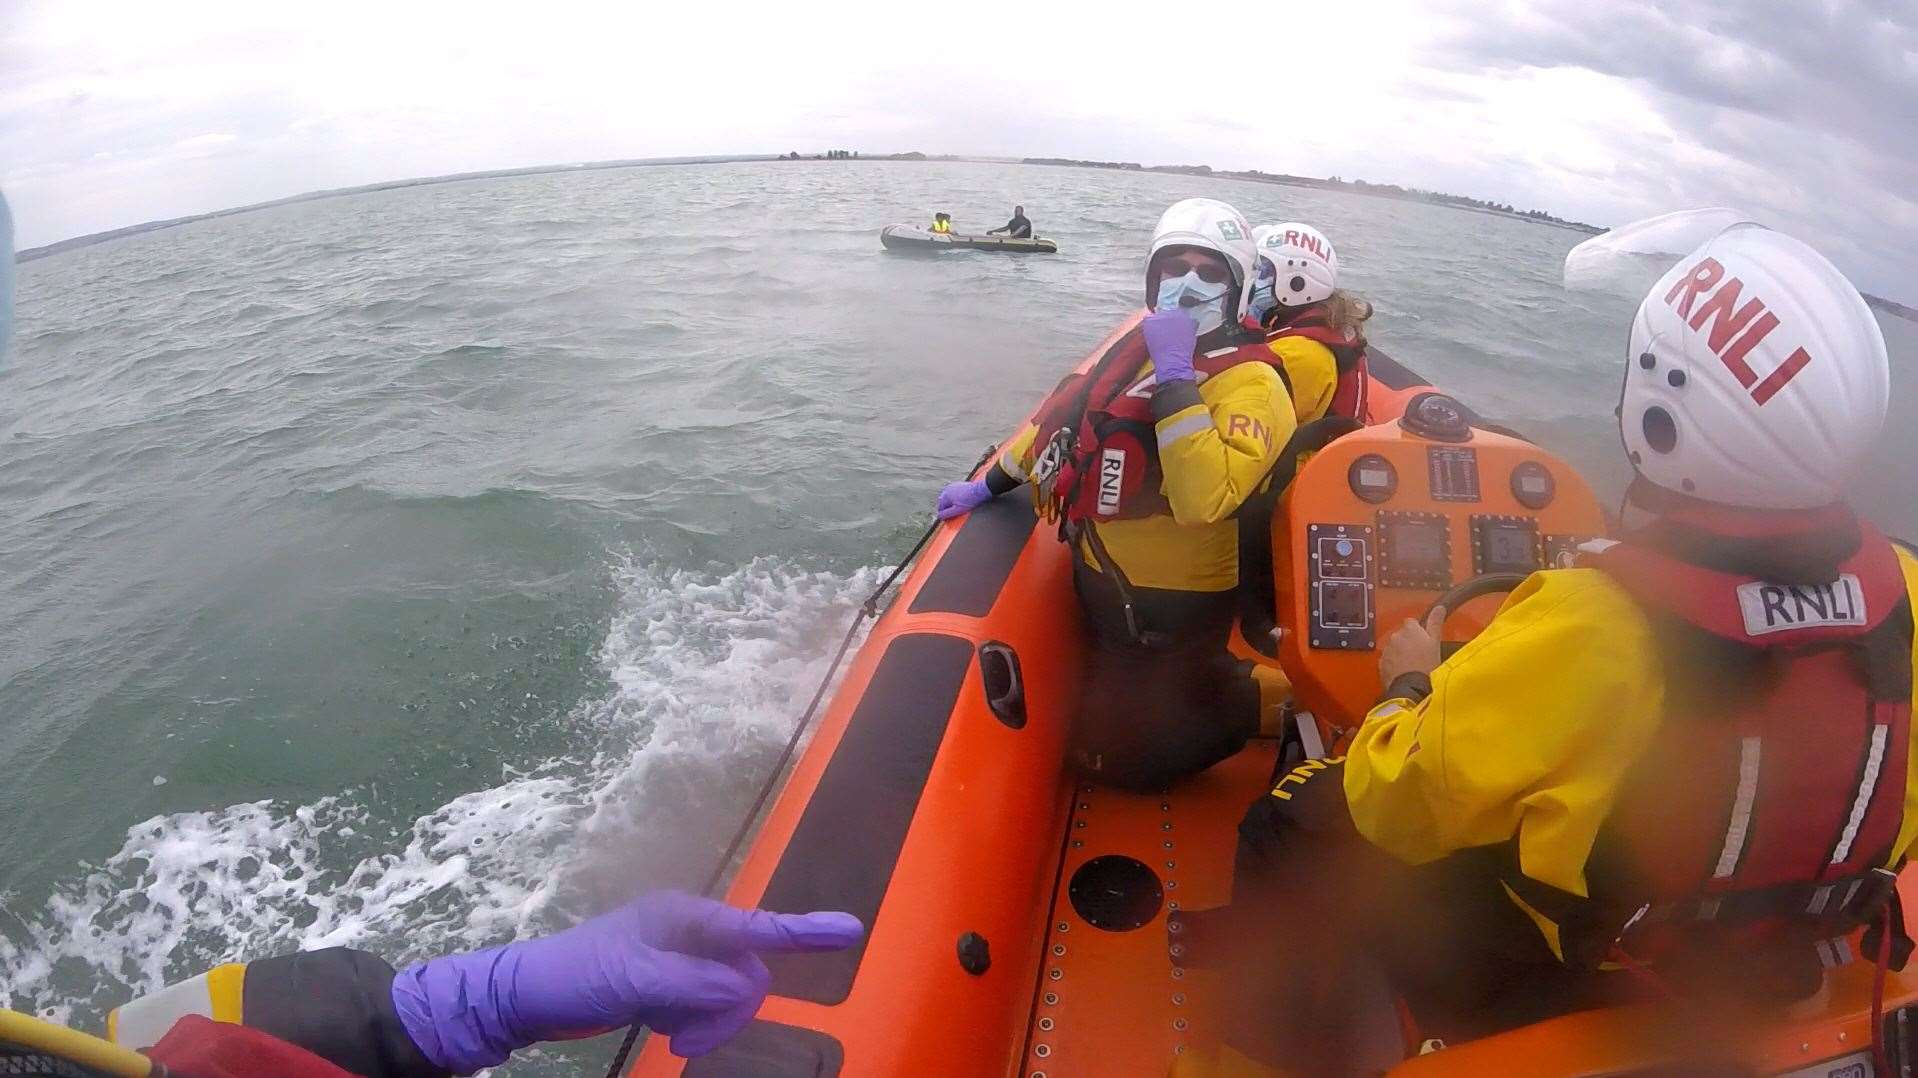 Whitstable lifeboat comes alongside the inflatable dinghy after the craft and it's three occupants were blown offshore from Leysdown, Isle of Sheppey on Tuesday afternoon. Picture: RNLI